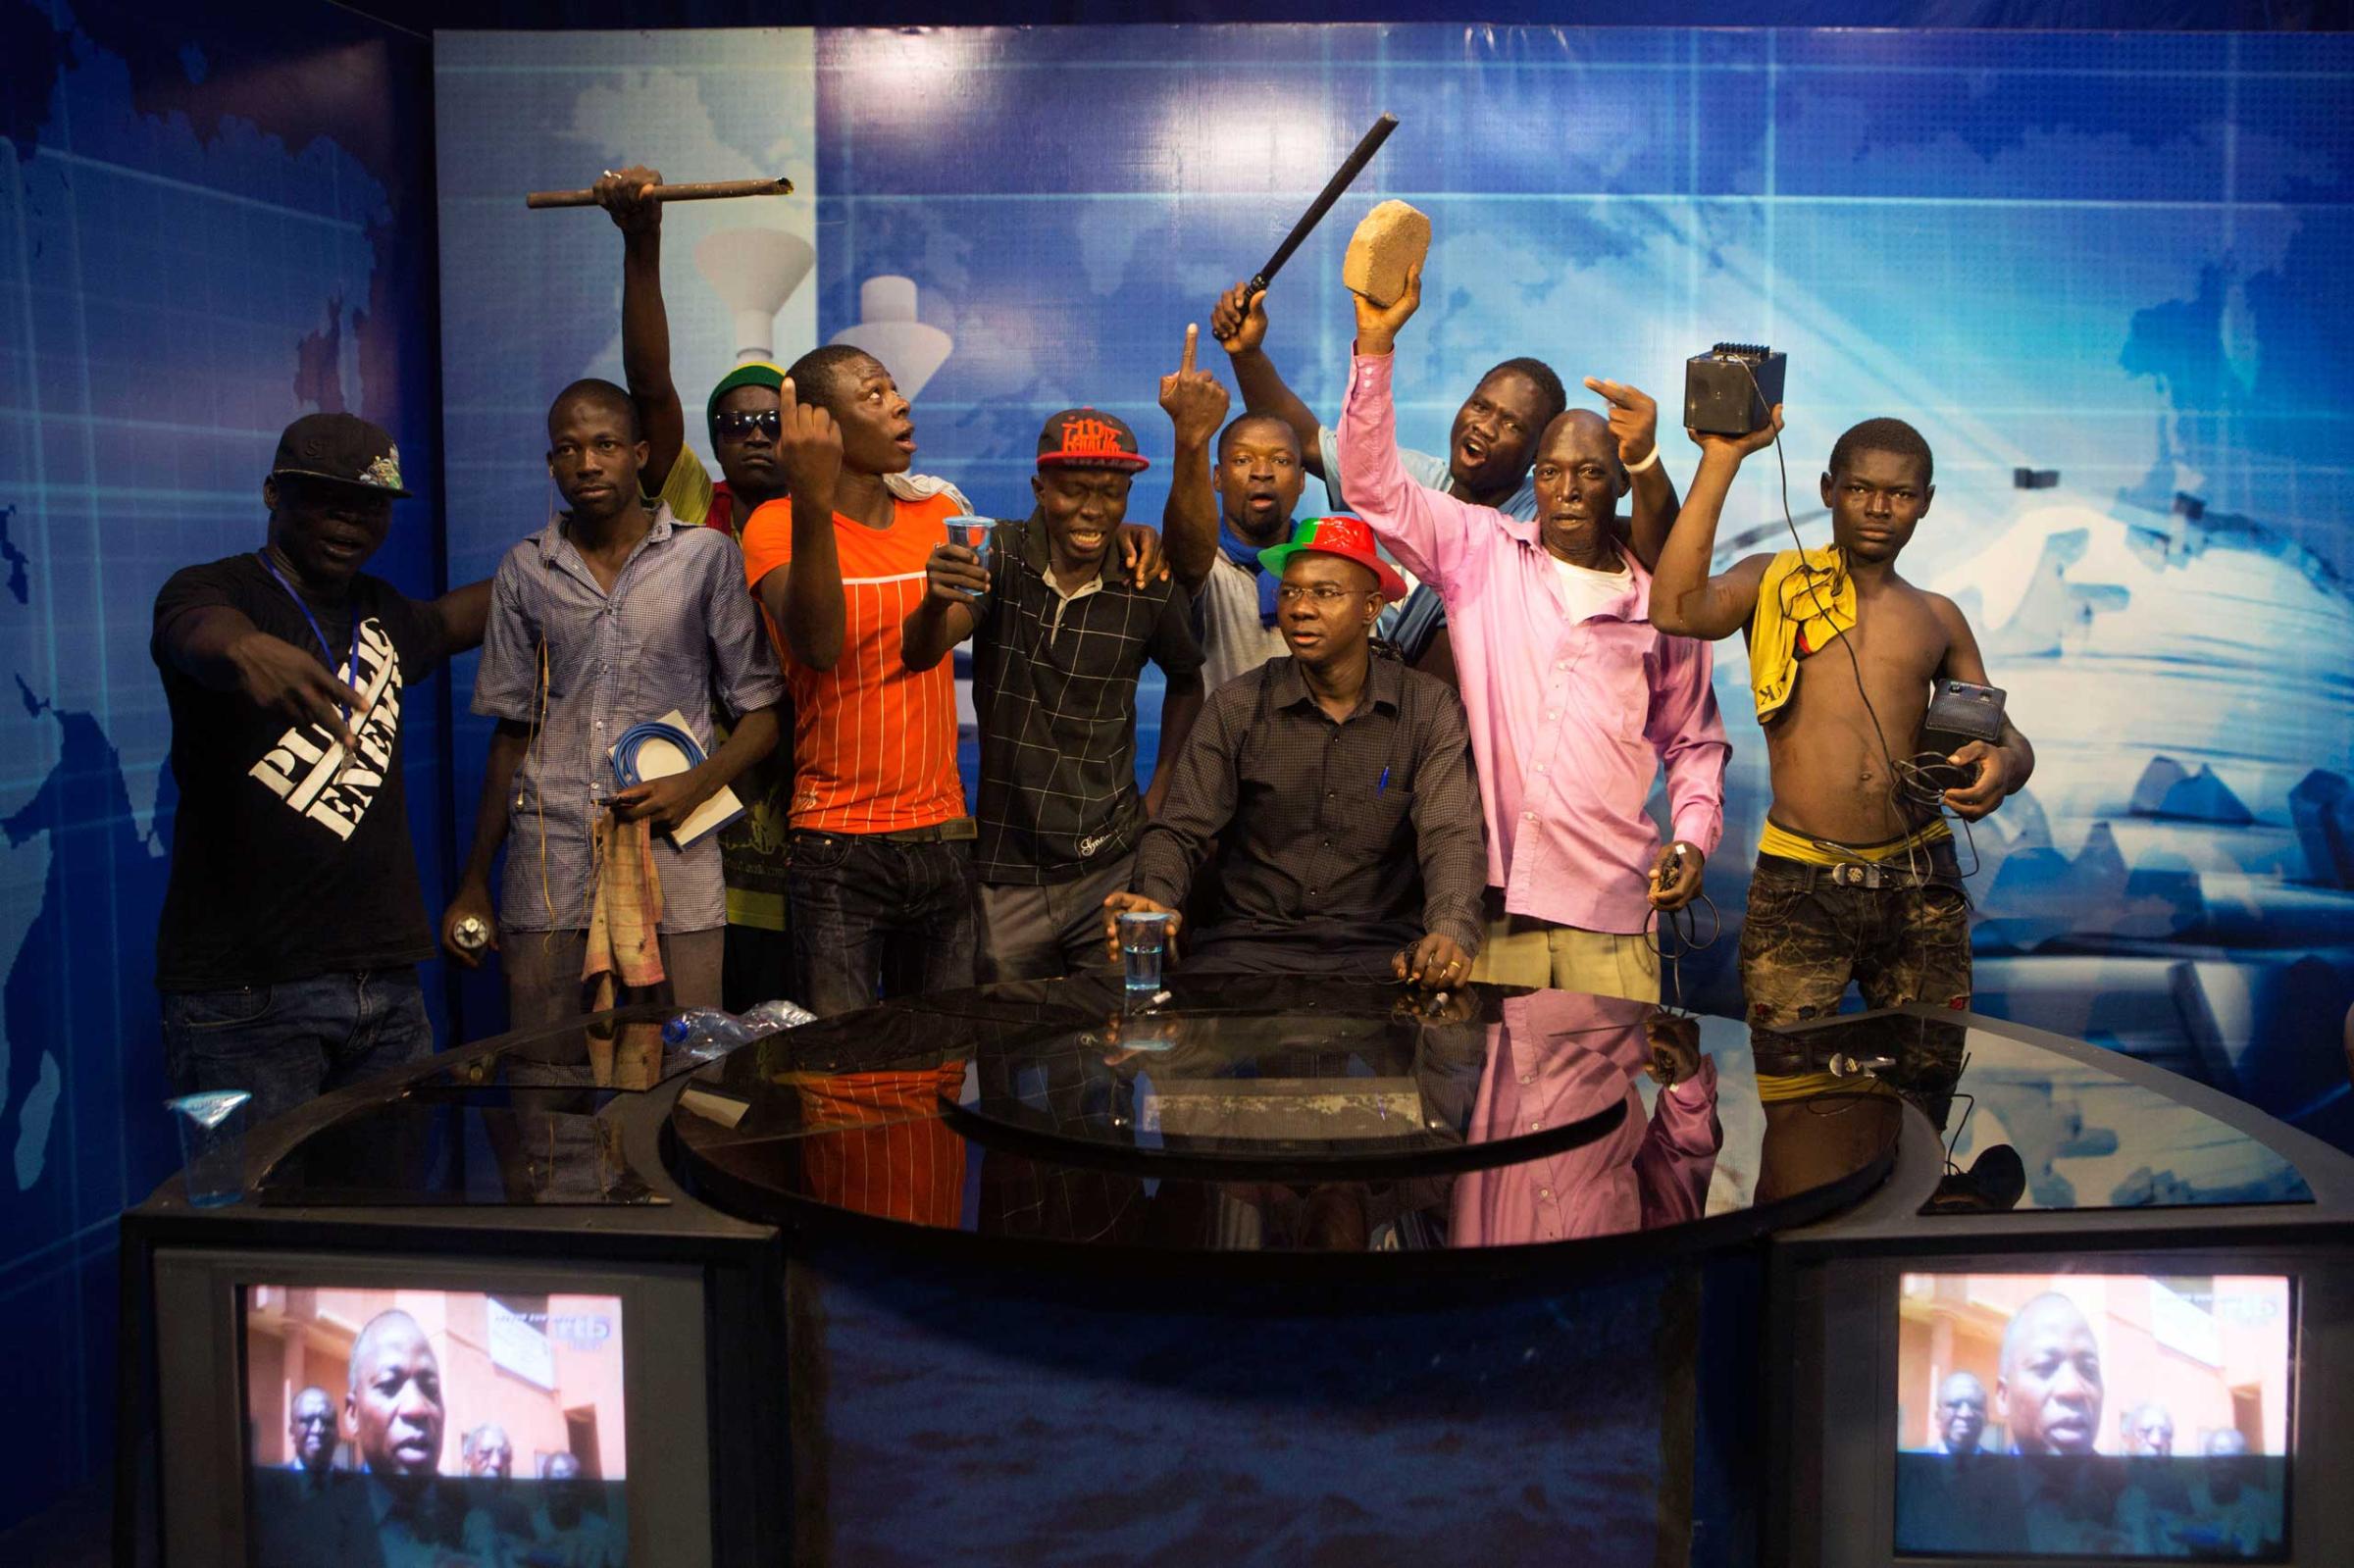 Anti-government protesters take over the state TV podium in Ouagadougou